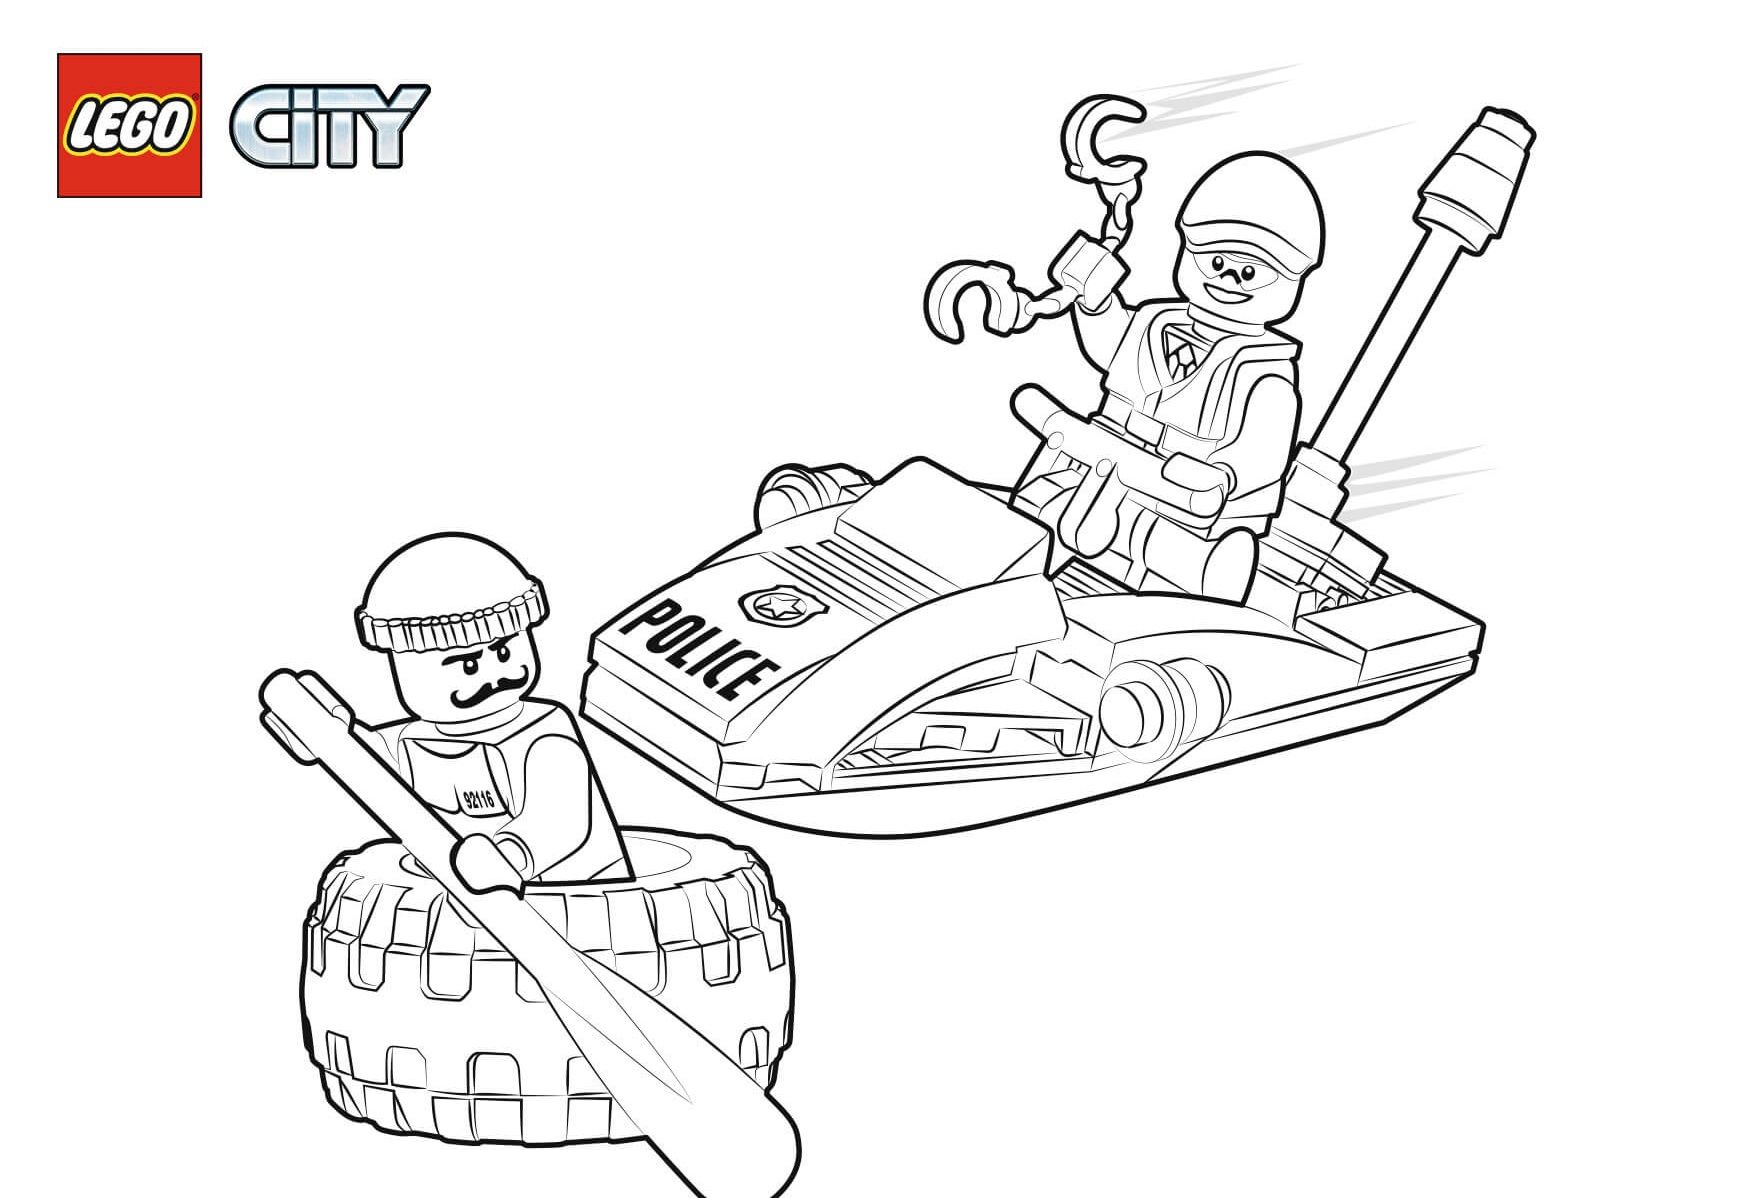 Glorious lego city coloring page